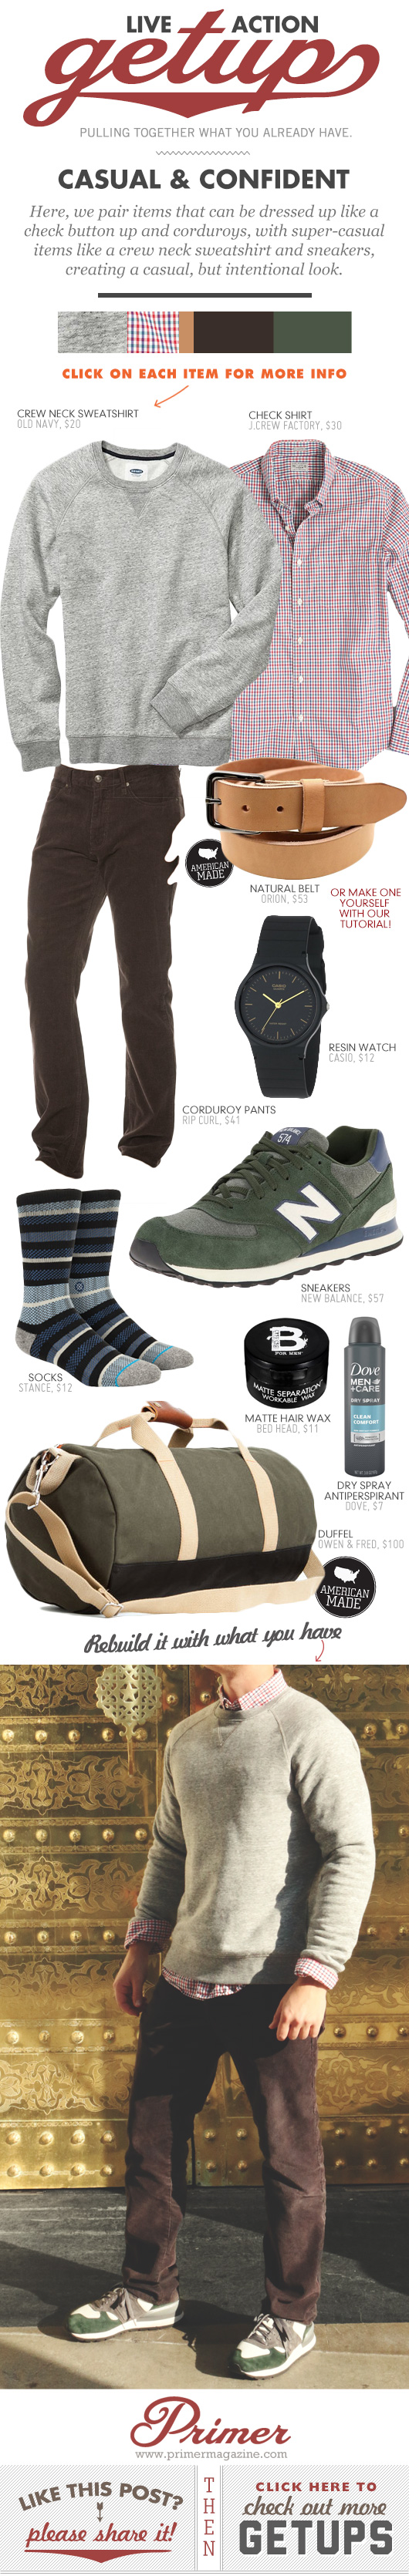 Getup Casual and Confident - gray sweatshirt, button up shirt, brown corduroys, green sneakers